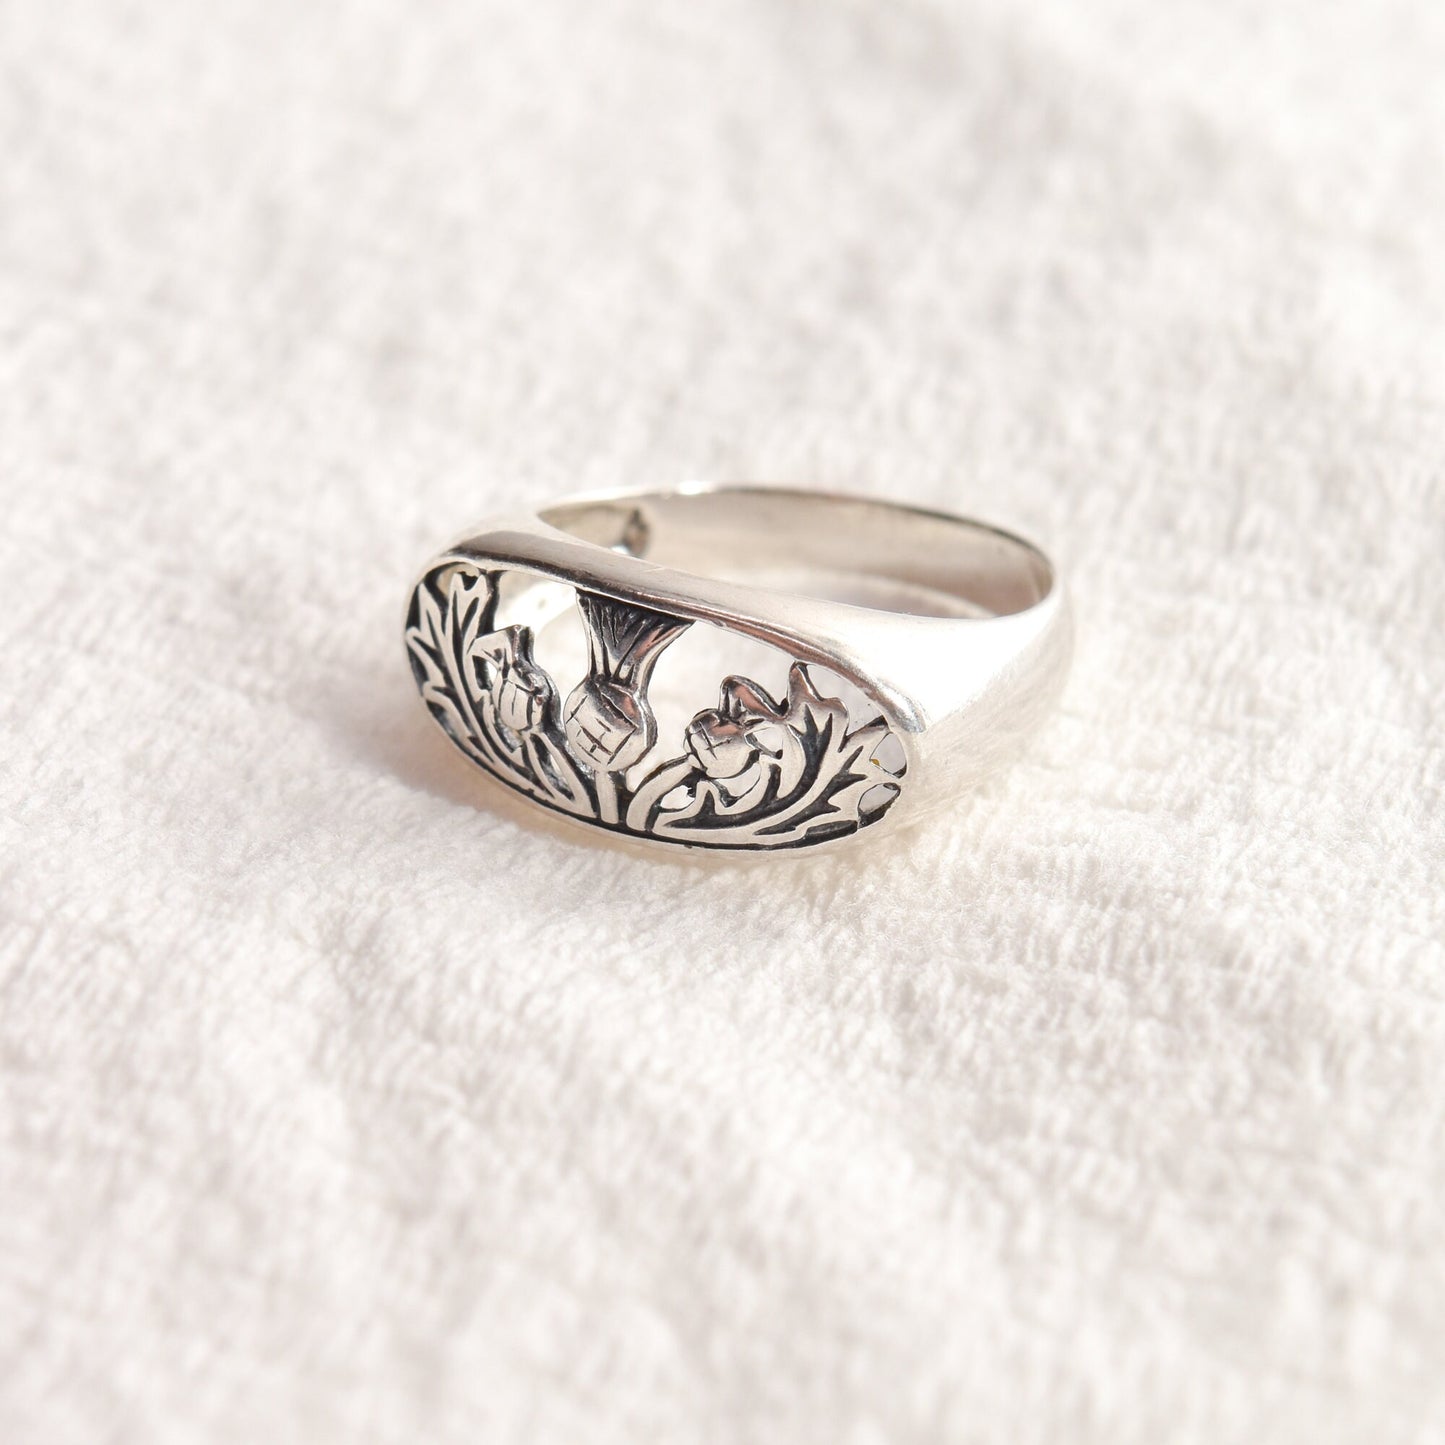 Sterling Silver Scottish Thistle Ring, Openwork Design, Cute Silver Stacking Ring, Size 7 US